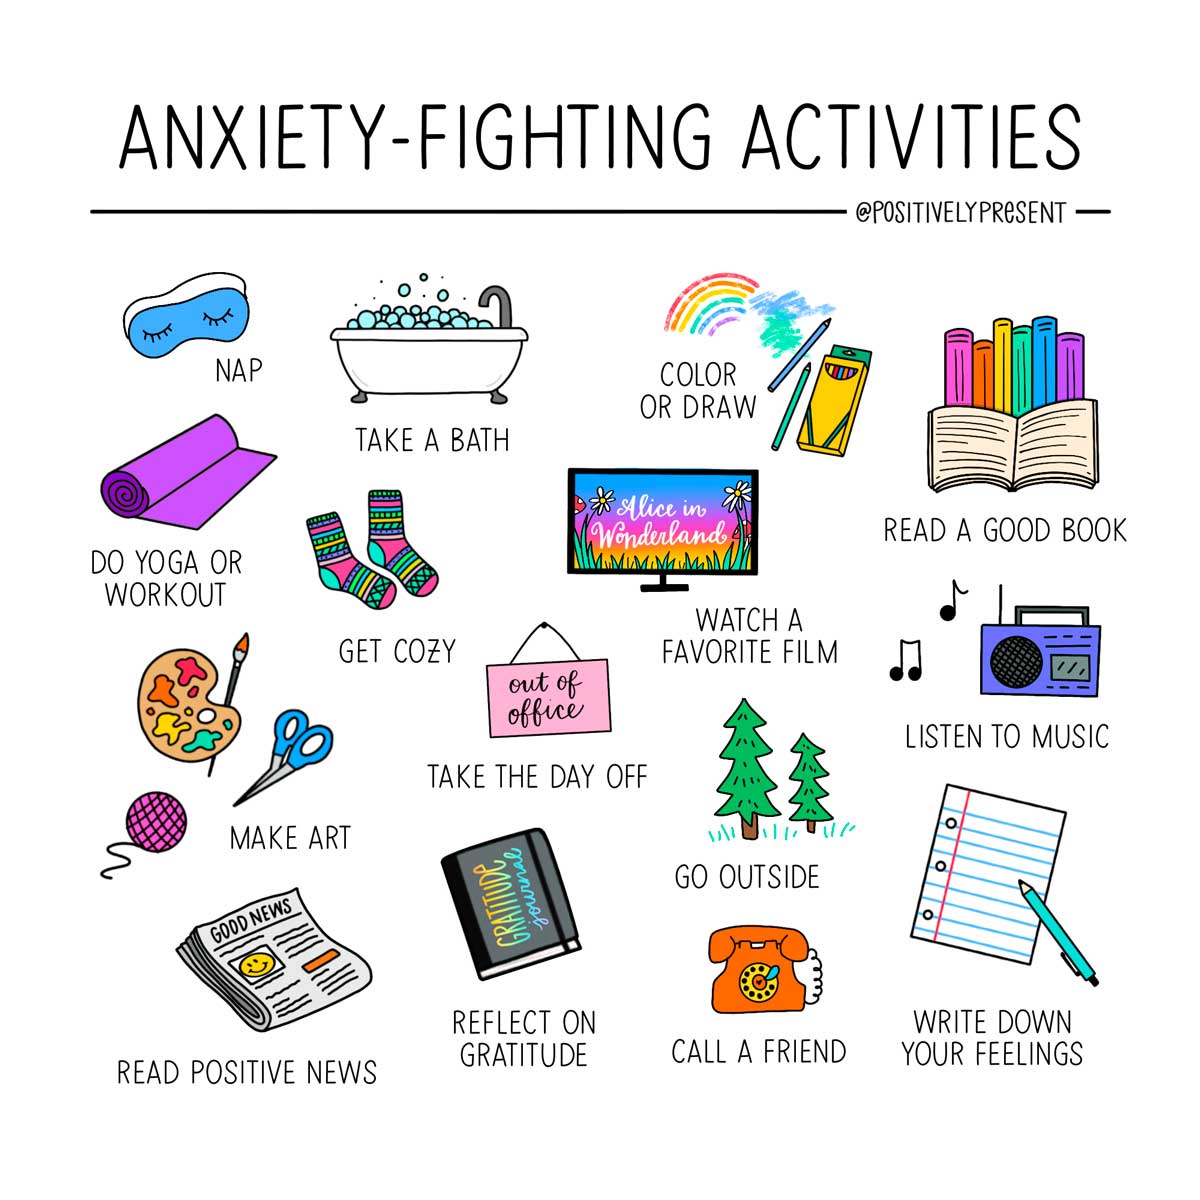 illustration has images of anxiety fighting activities.